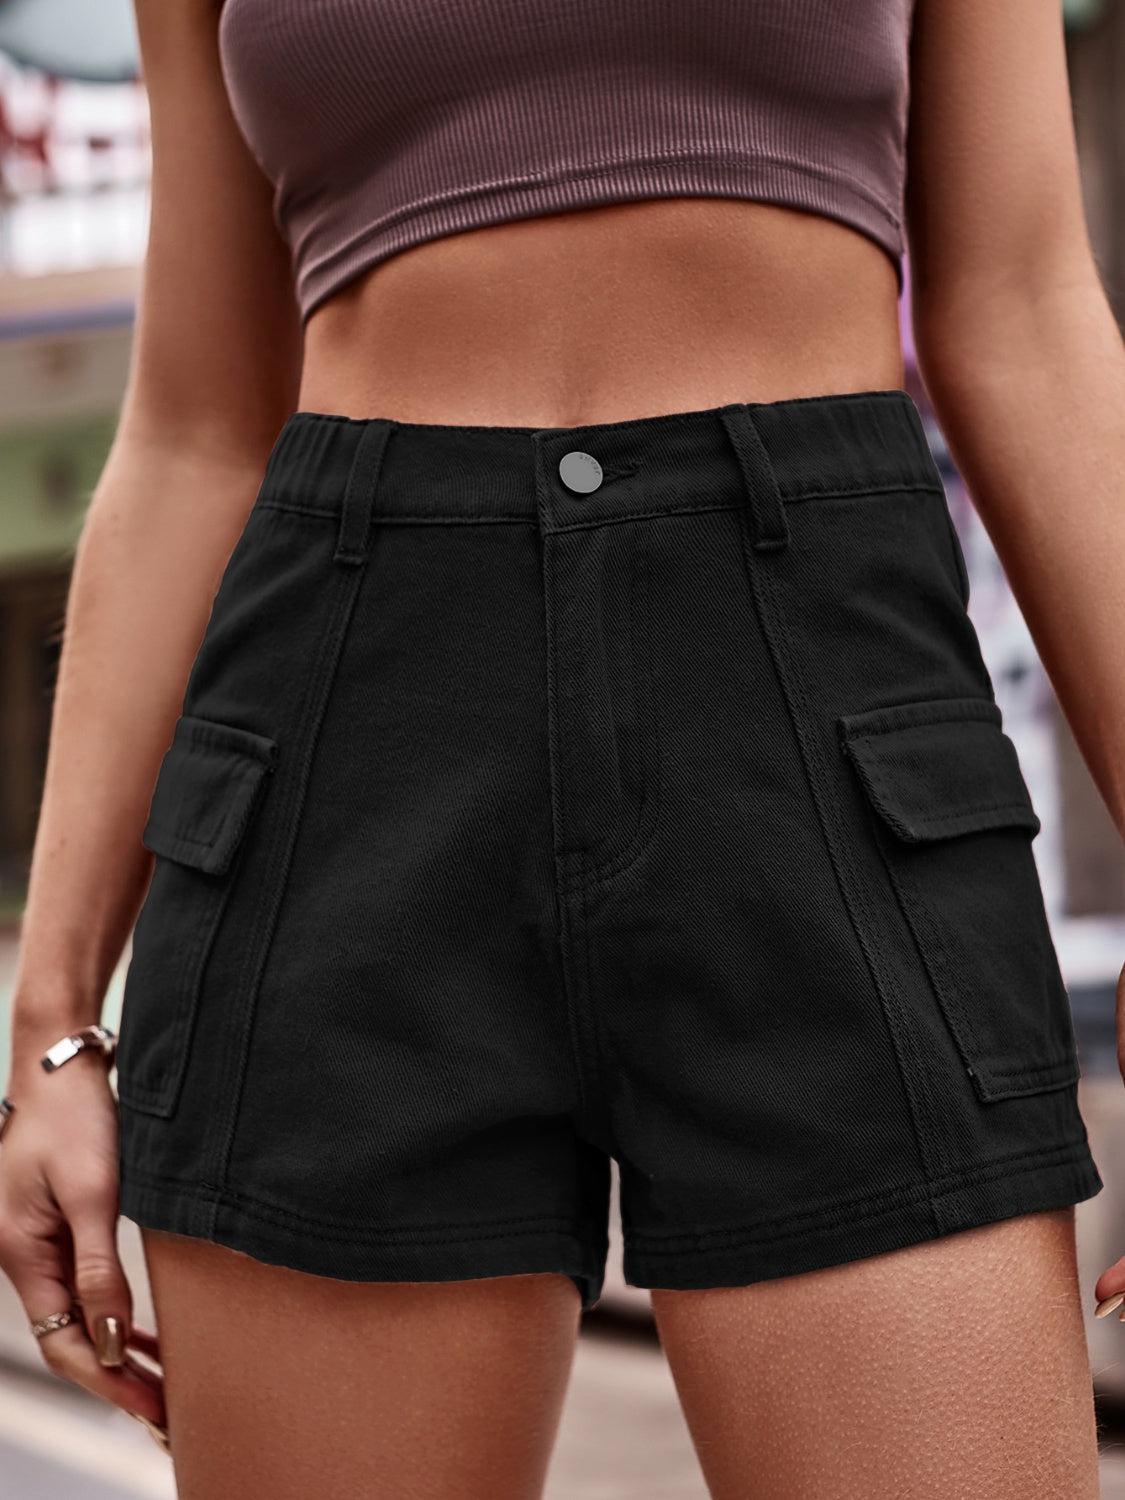 a close up of a person wearing black shorts